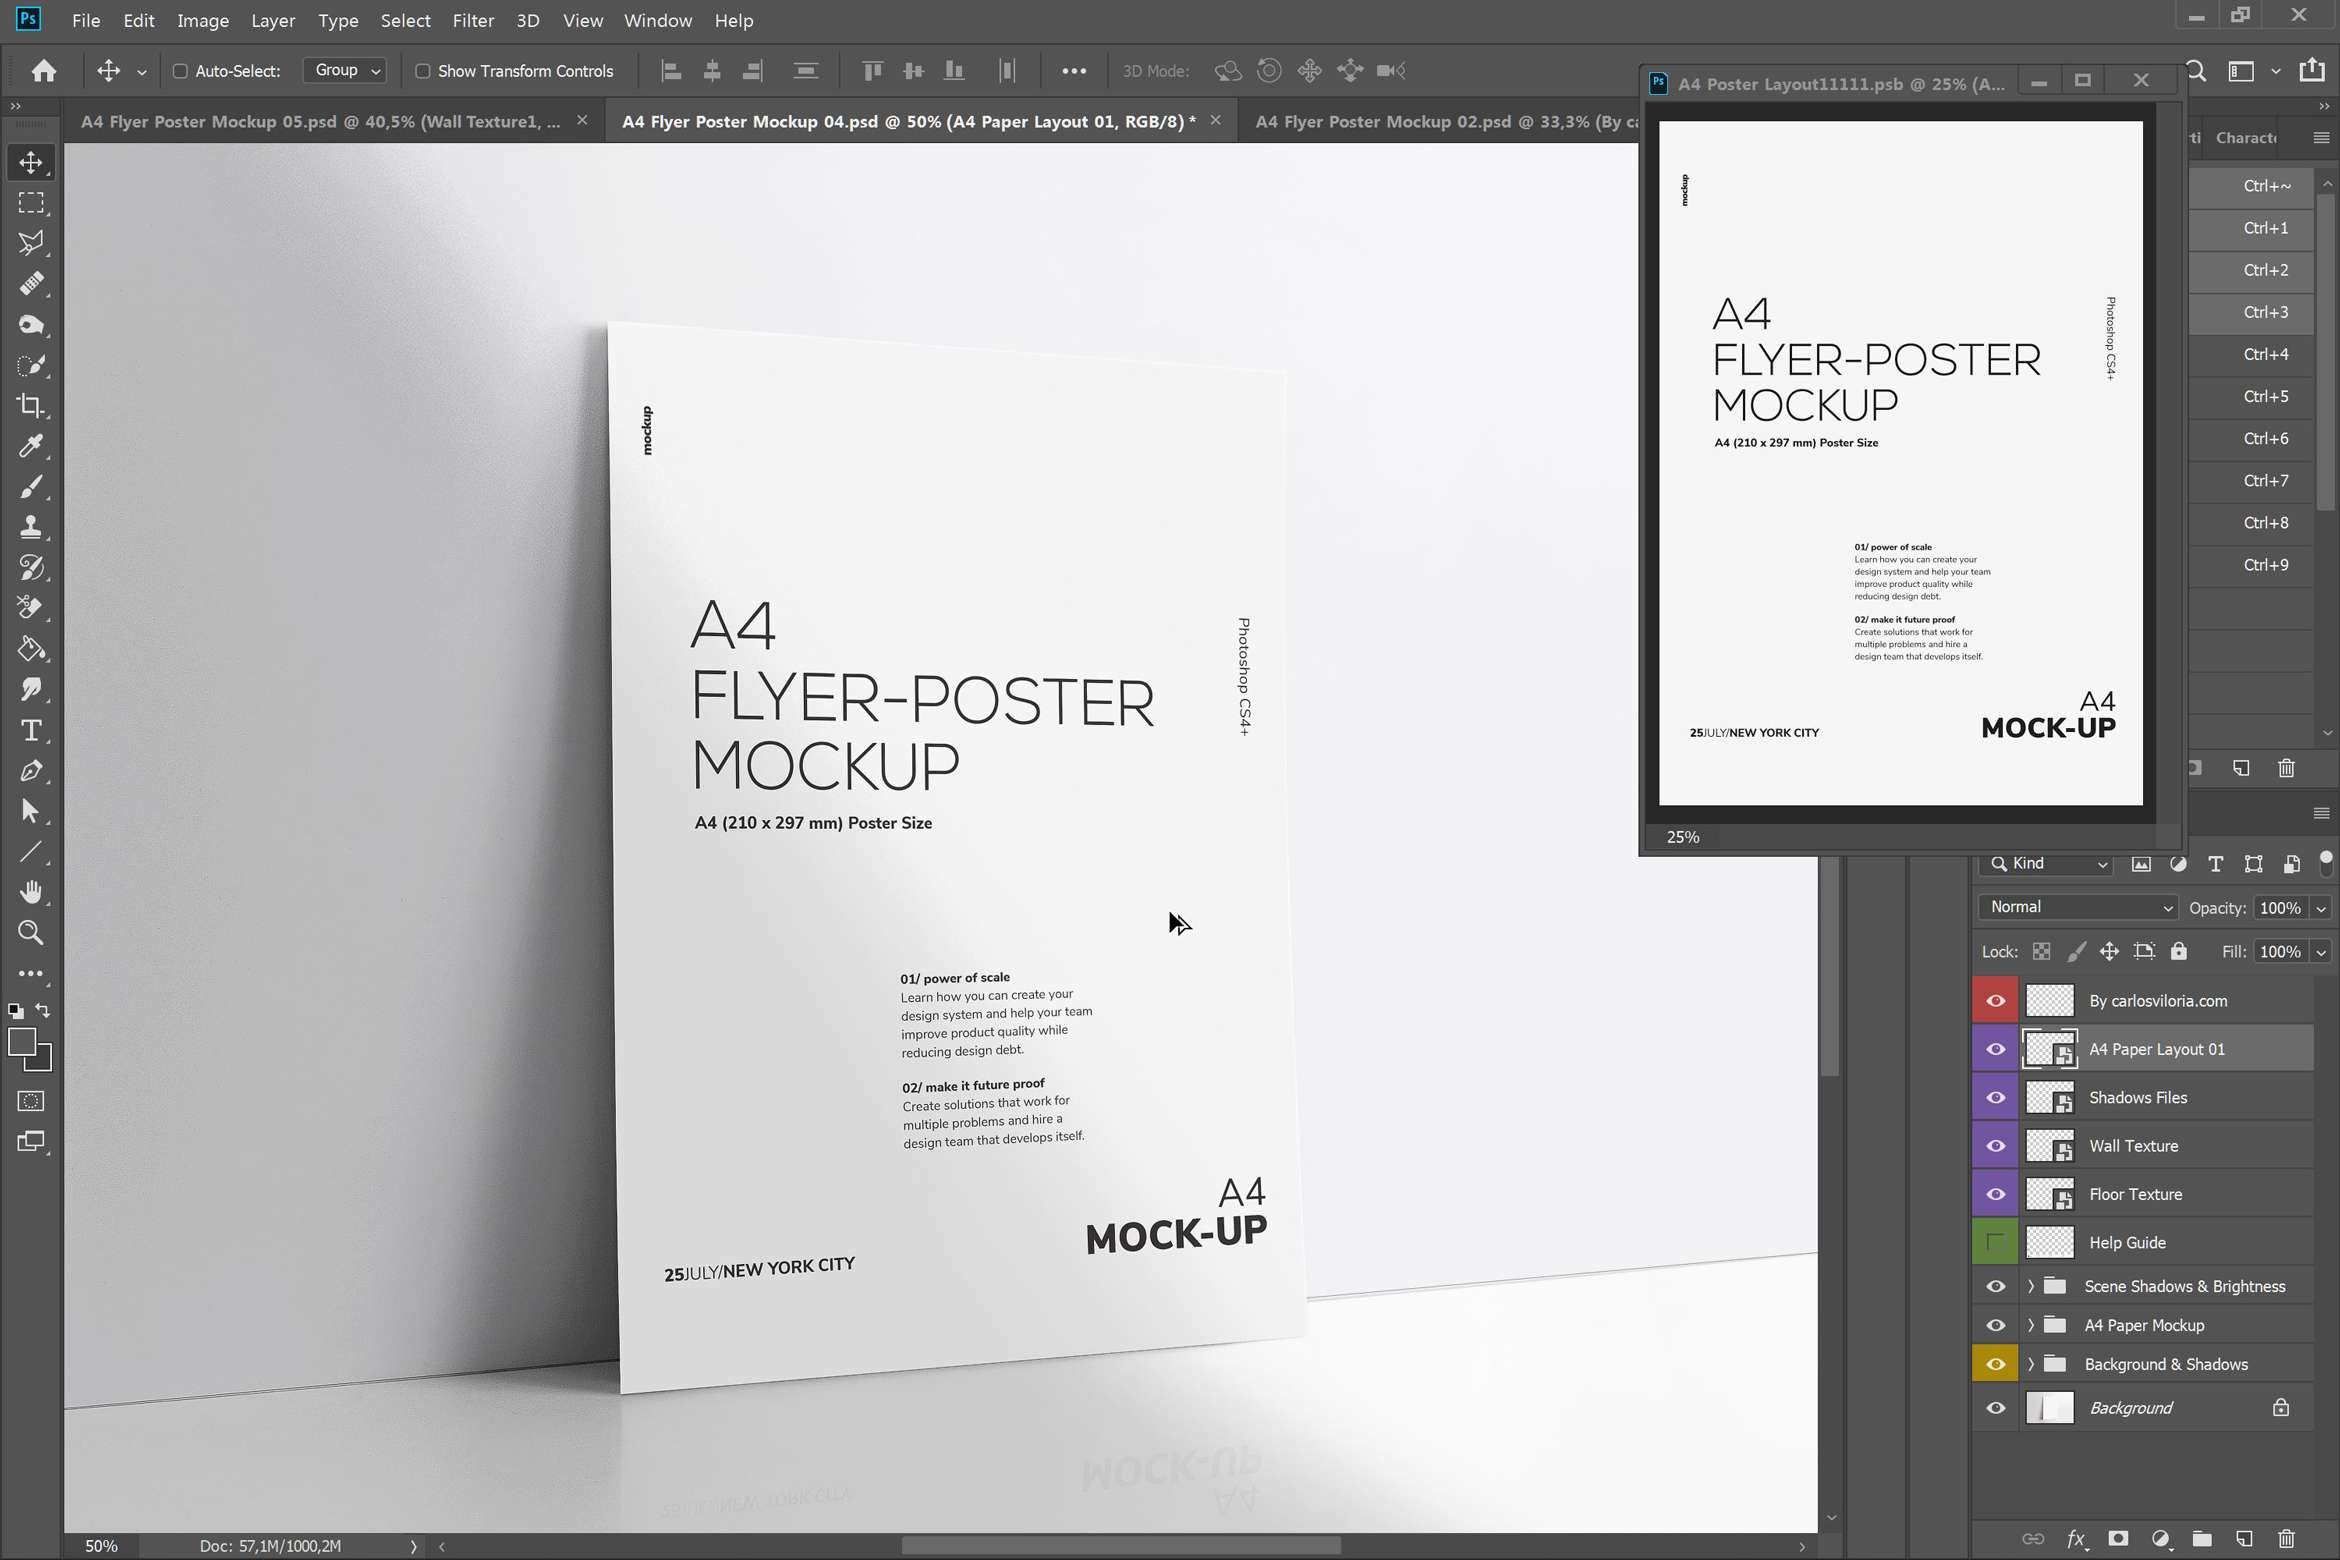 Leaning A4 Flyer-poster Mockup